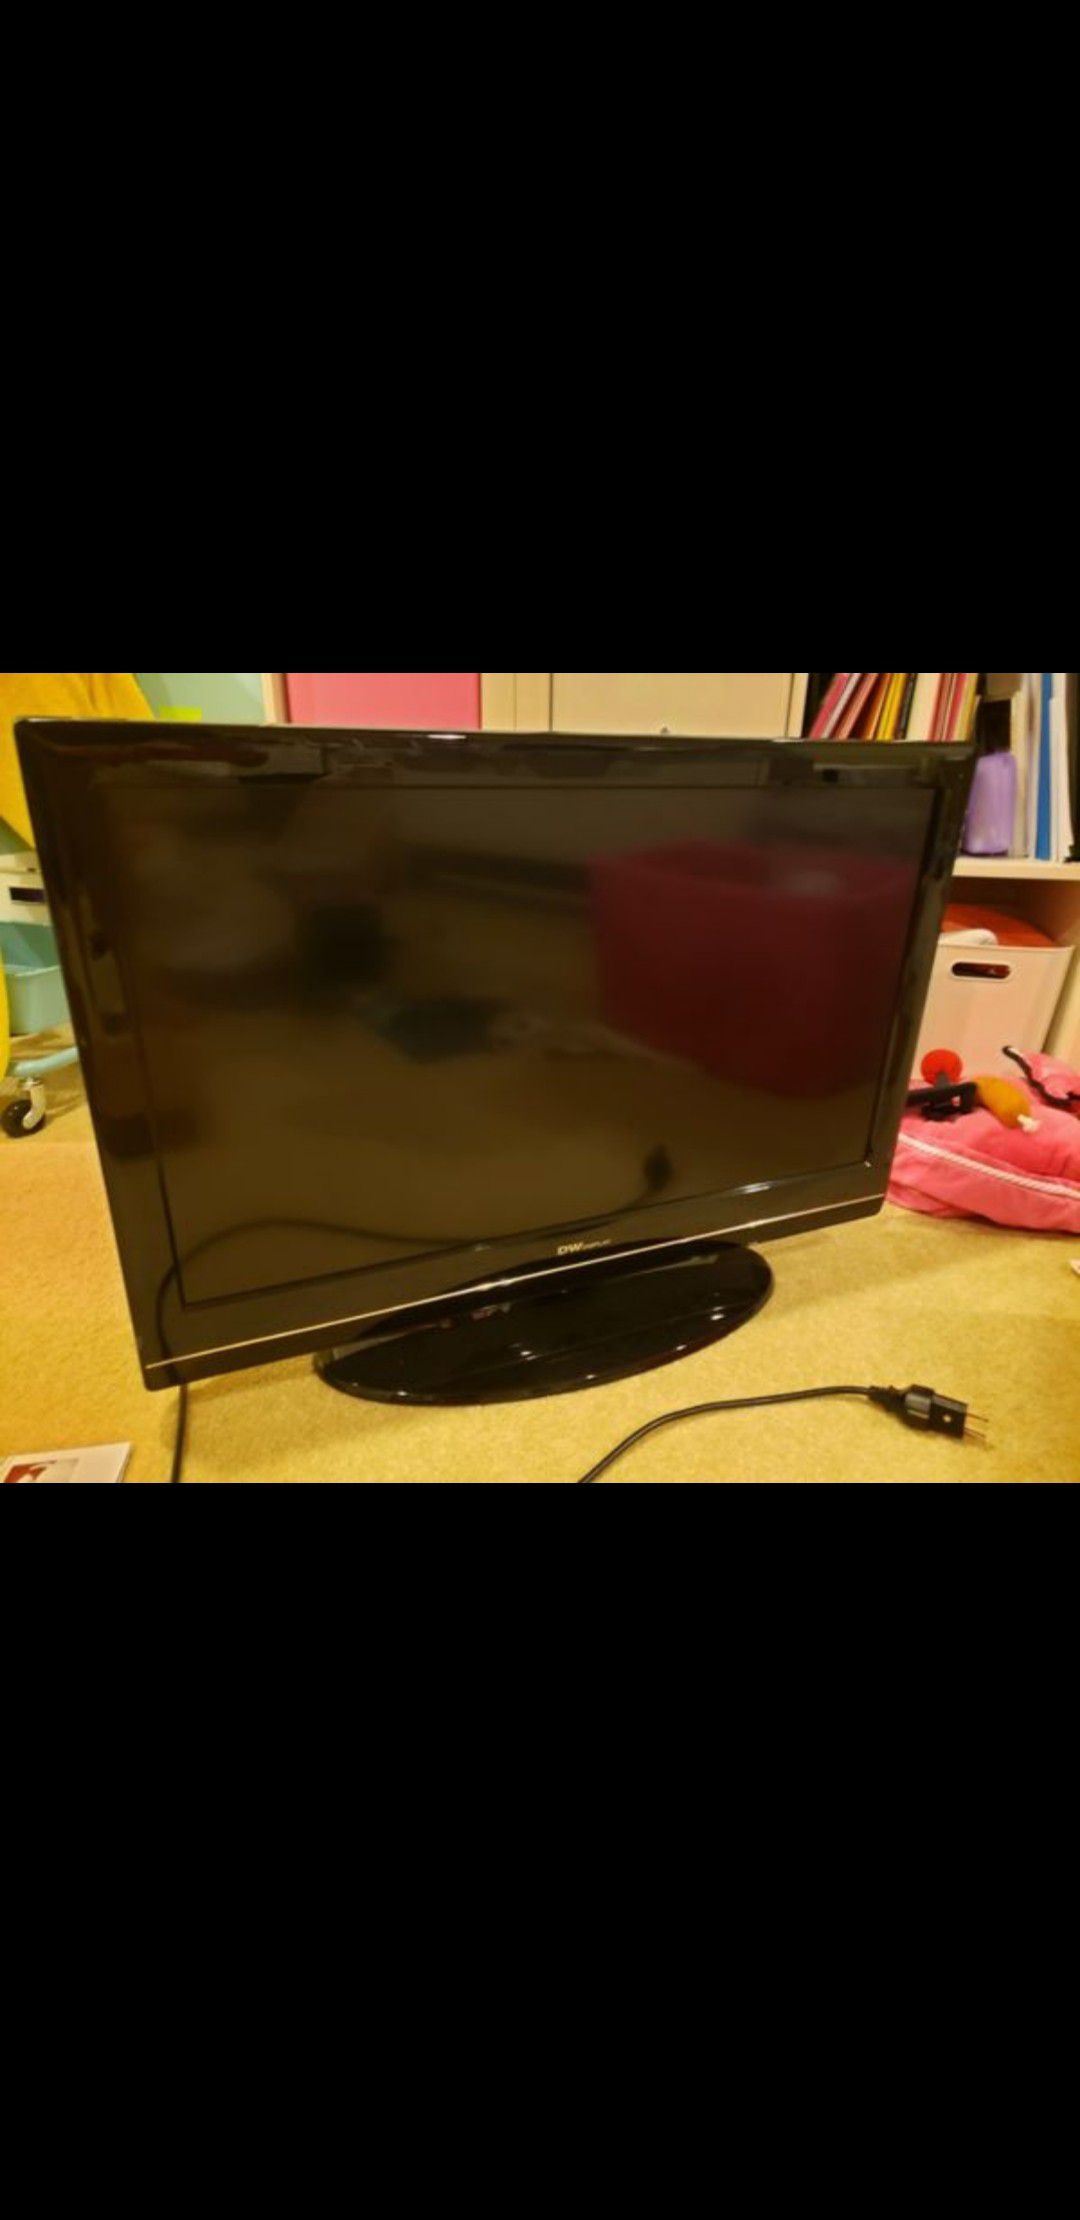 TV with no remote but good condition